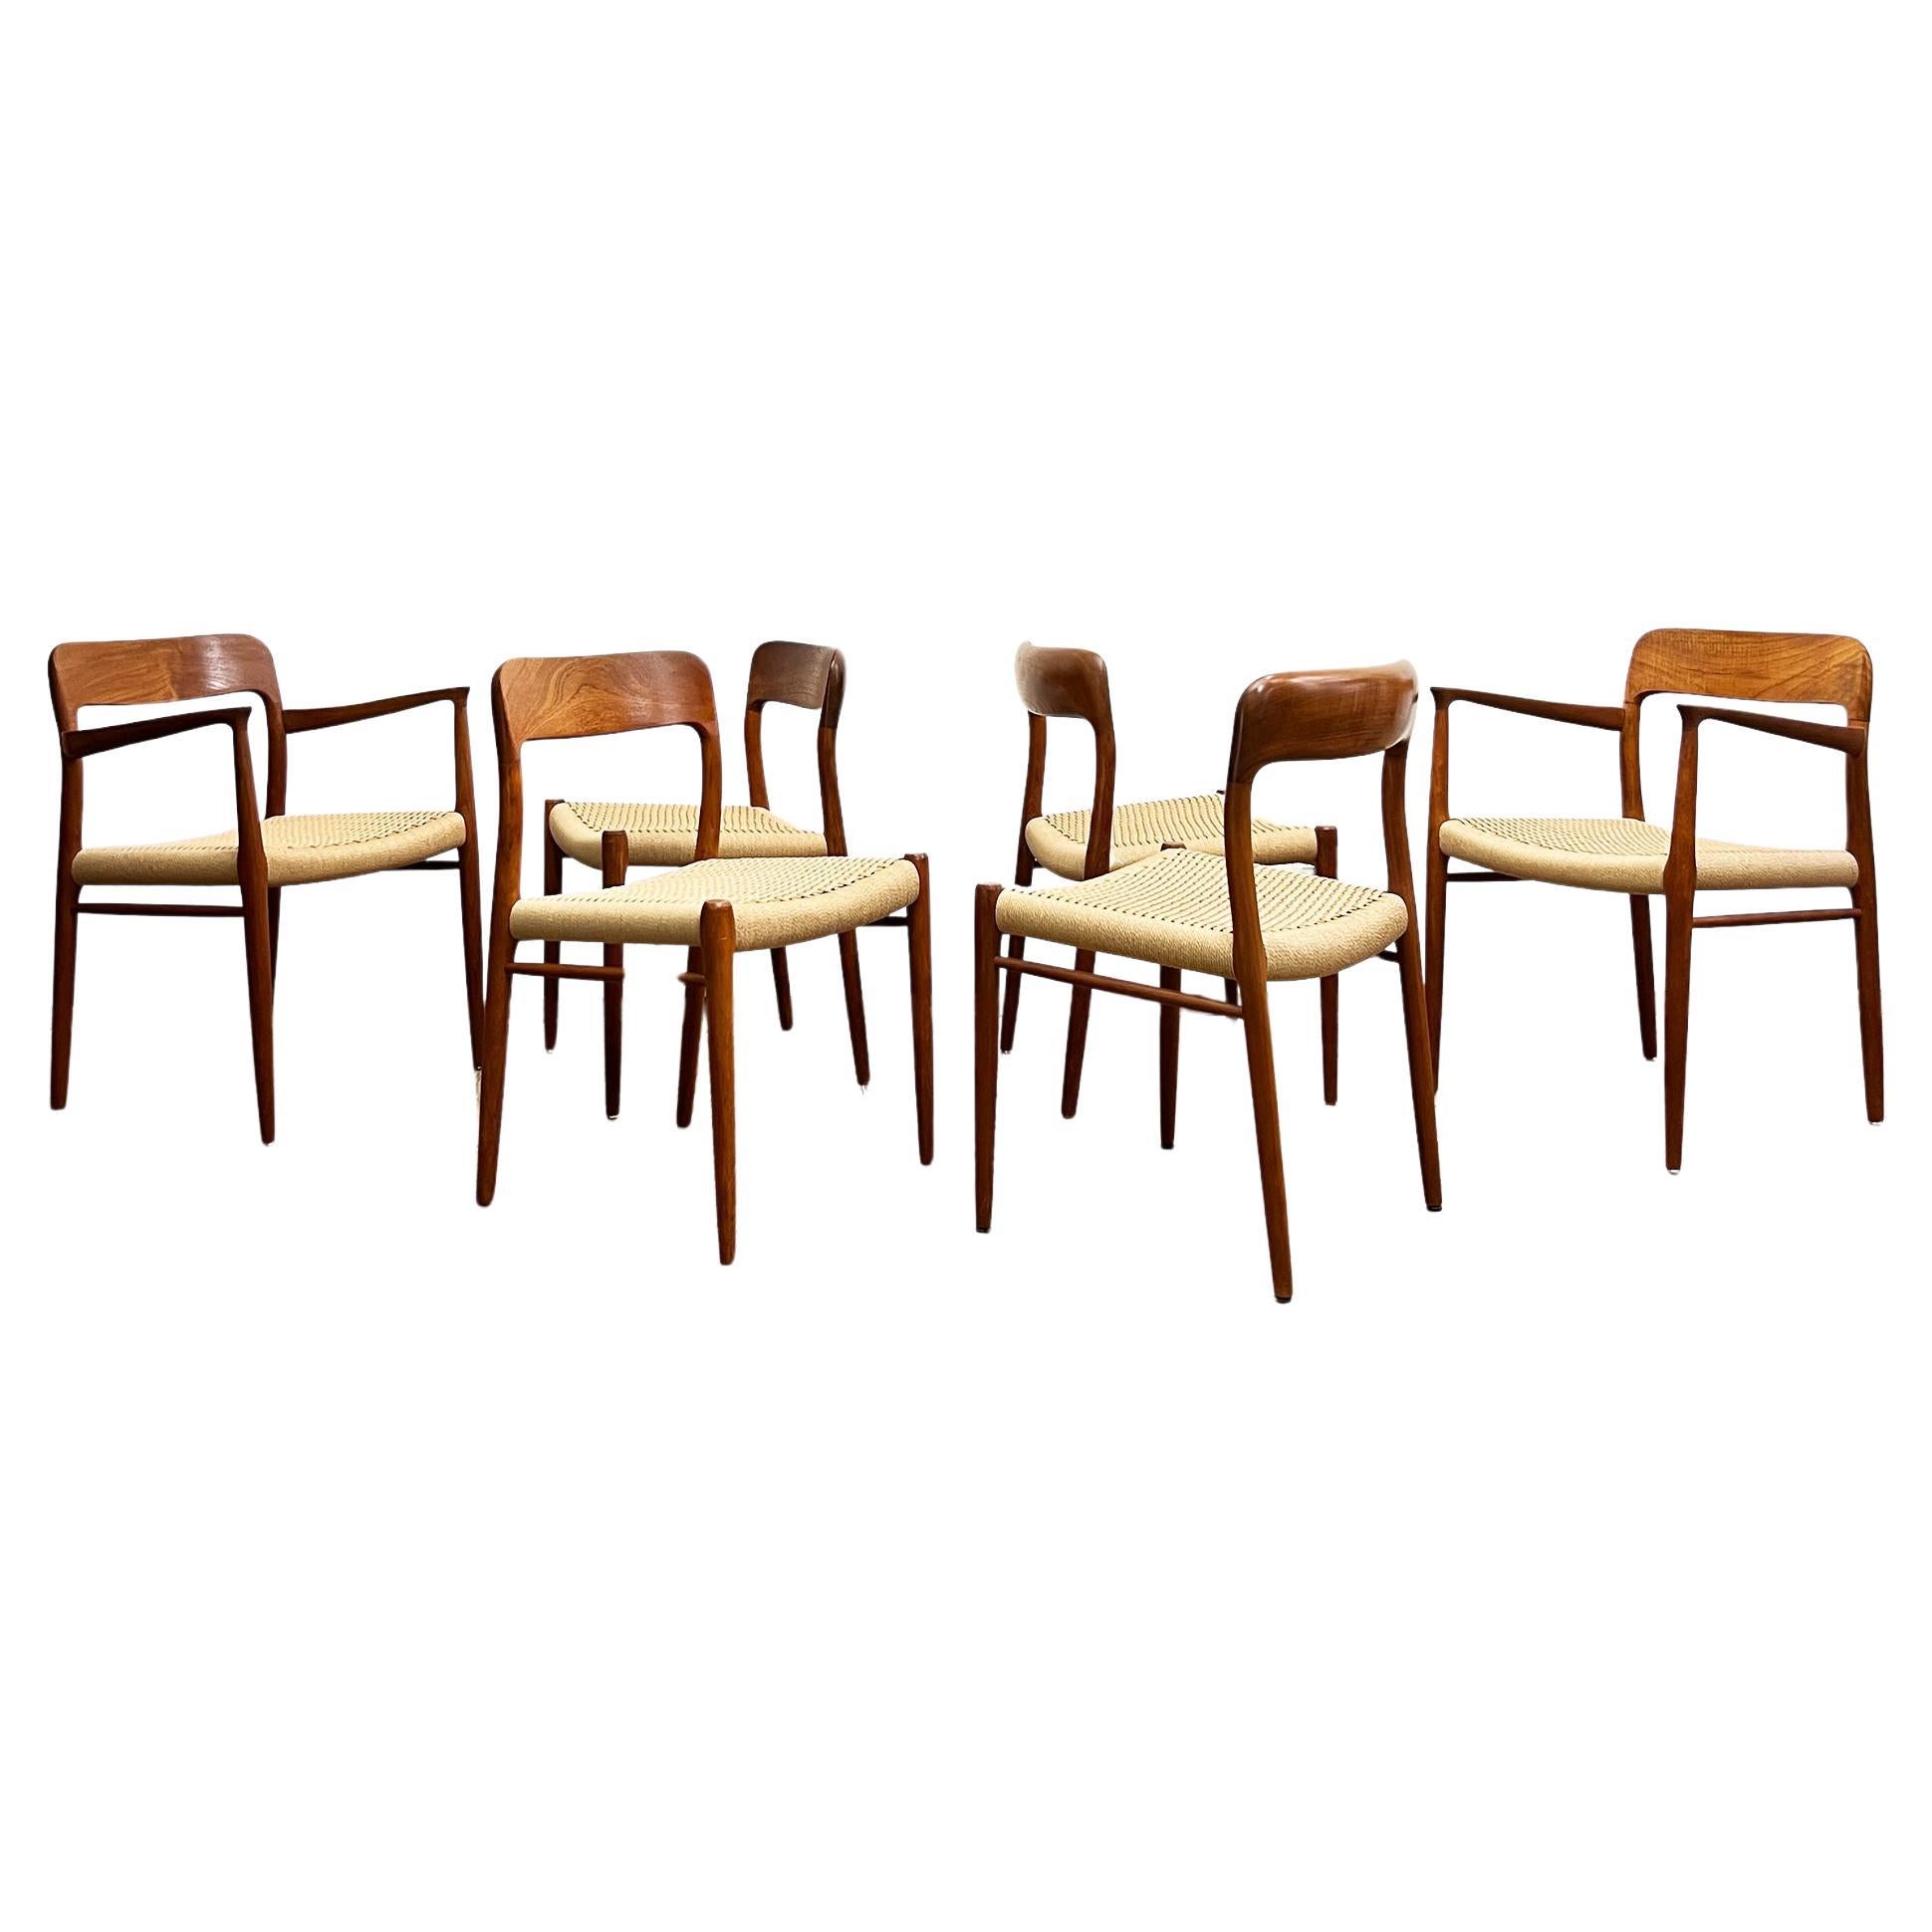 6 Mid-Century Teak Dining Chairs  No.56 & 75 by Niels O. Møller for J. L. Moller